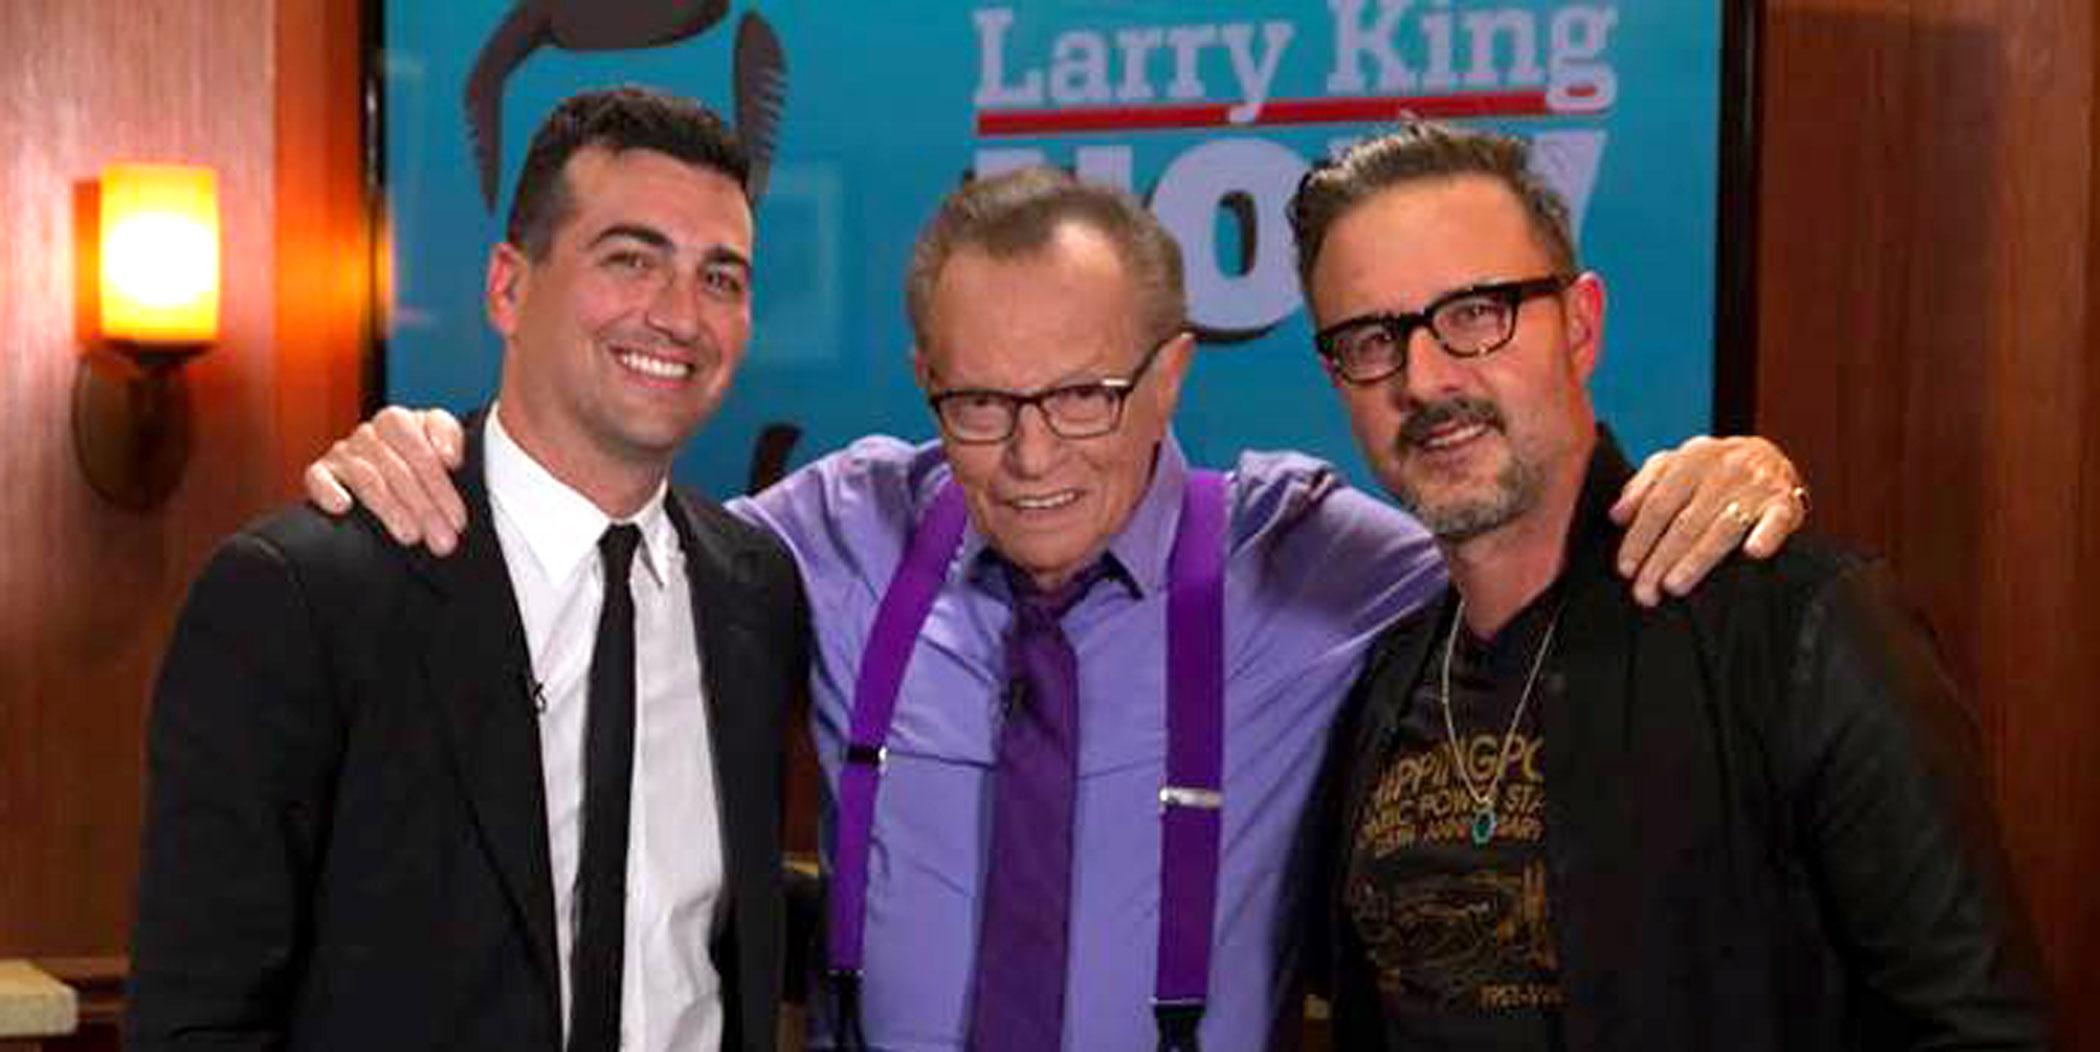 erzian with TV host Larry King and actor David Arquette. Photo Courtesy of The h.wood Group & Ora TV 